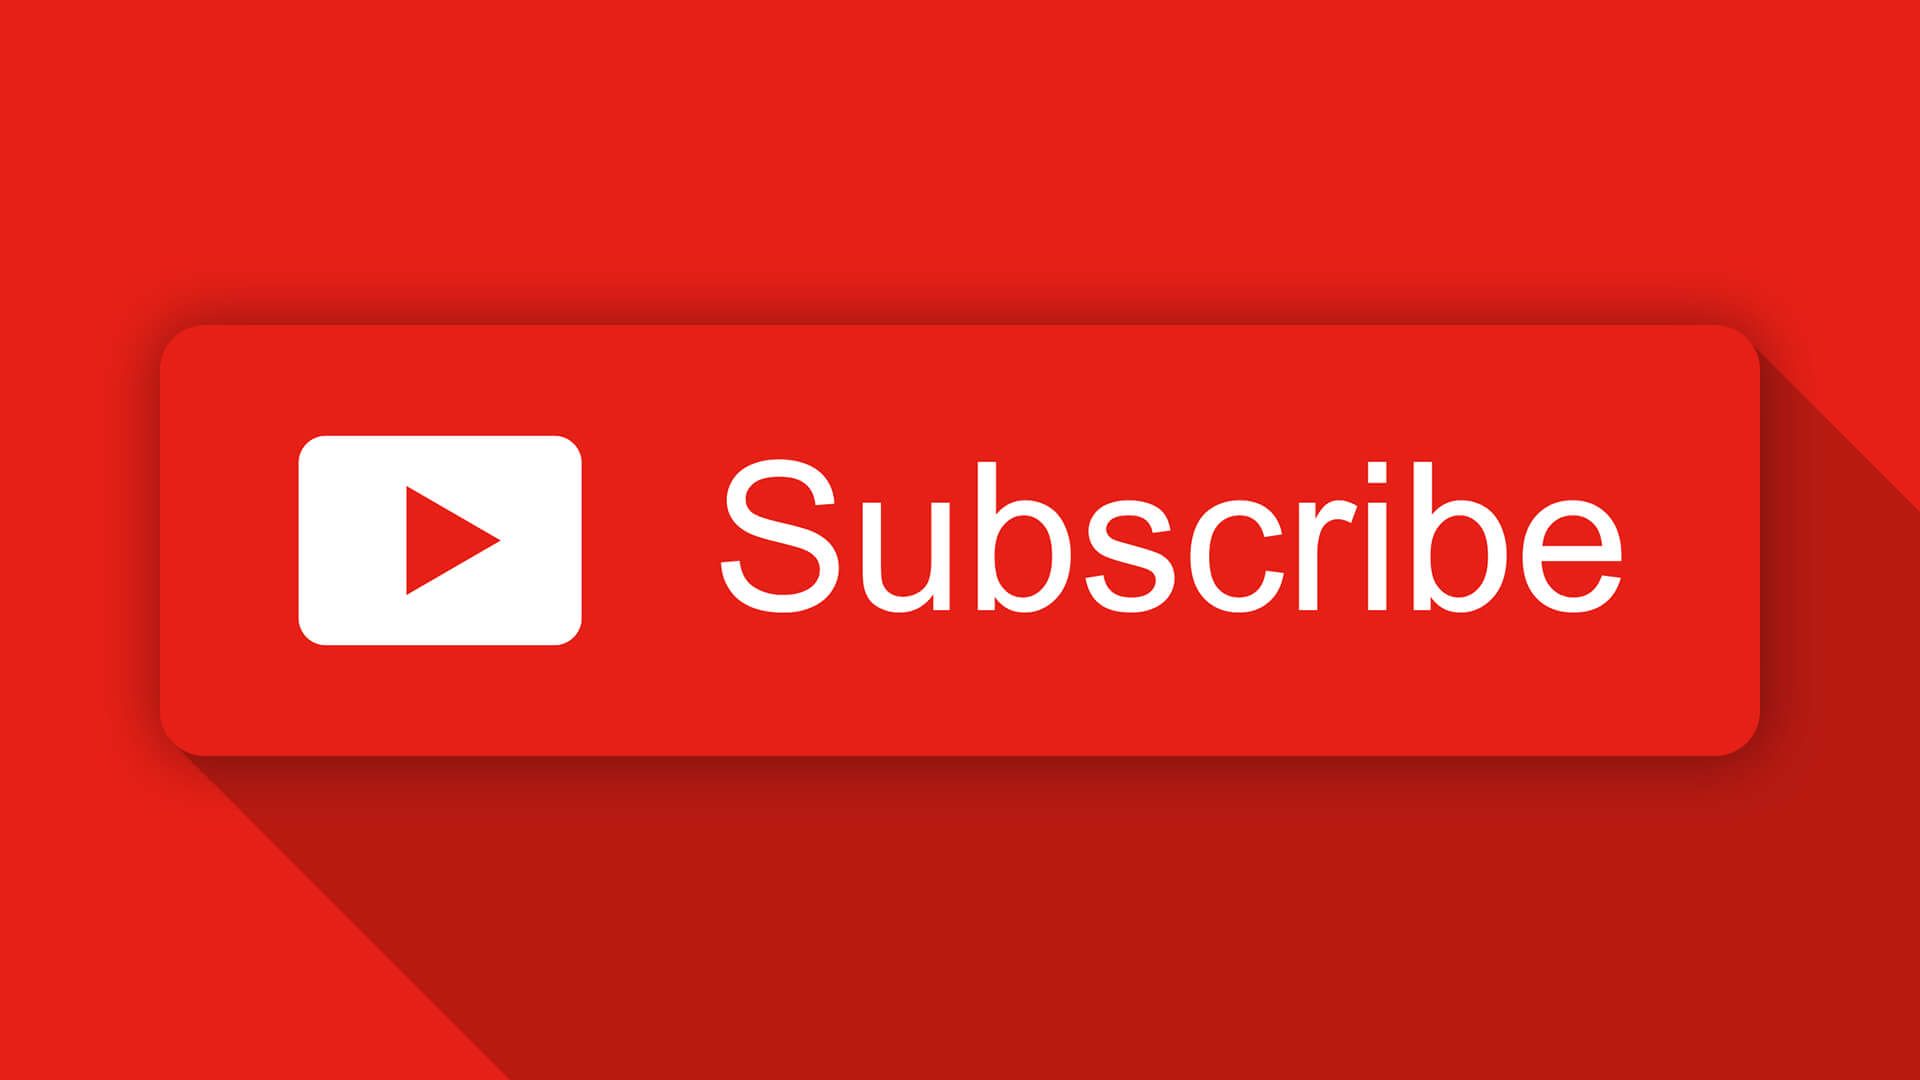 How to get YouTube subscribers effortlessly?